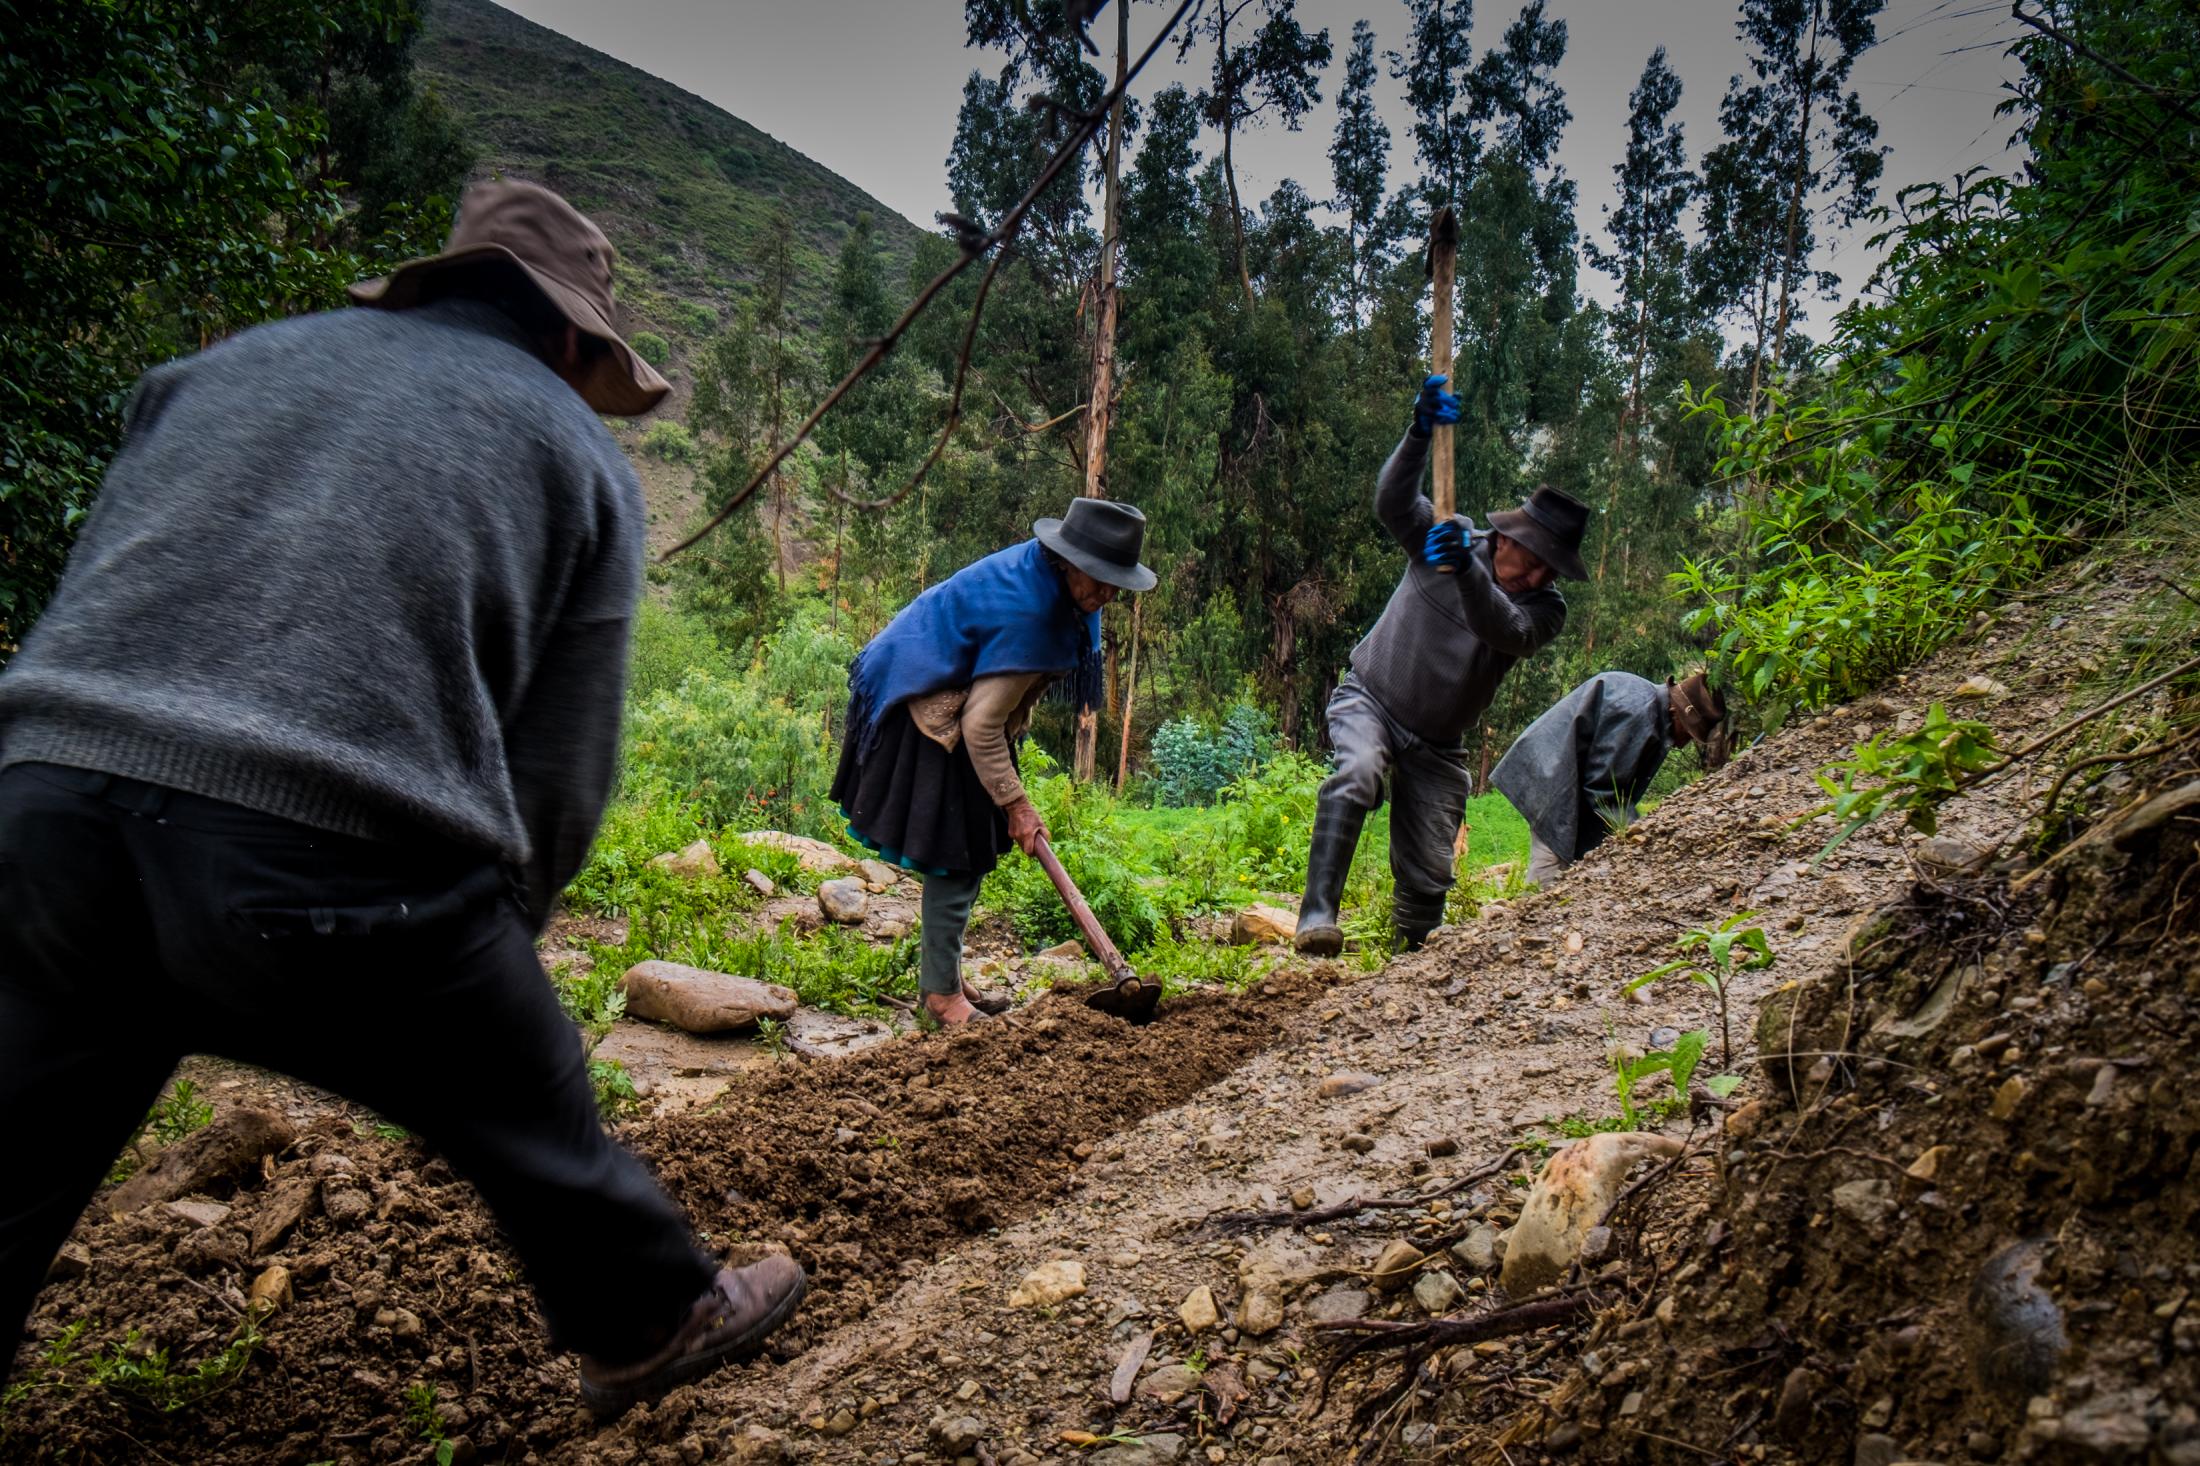 Bolivian women resilient to climate change - 